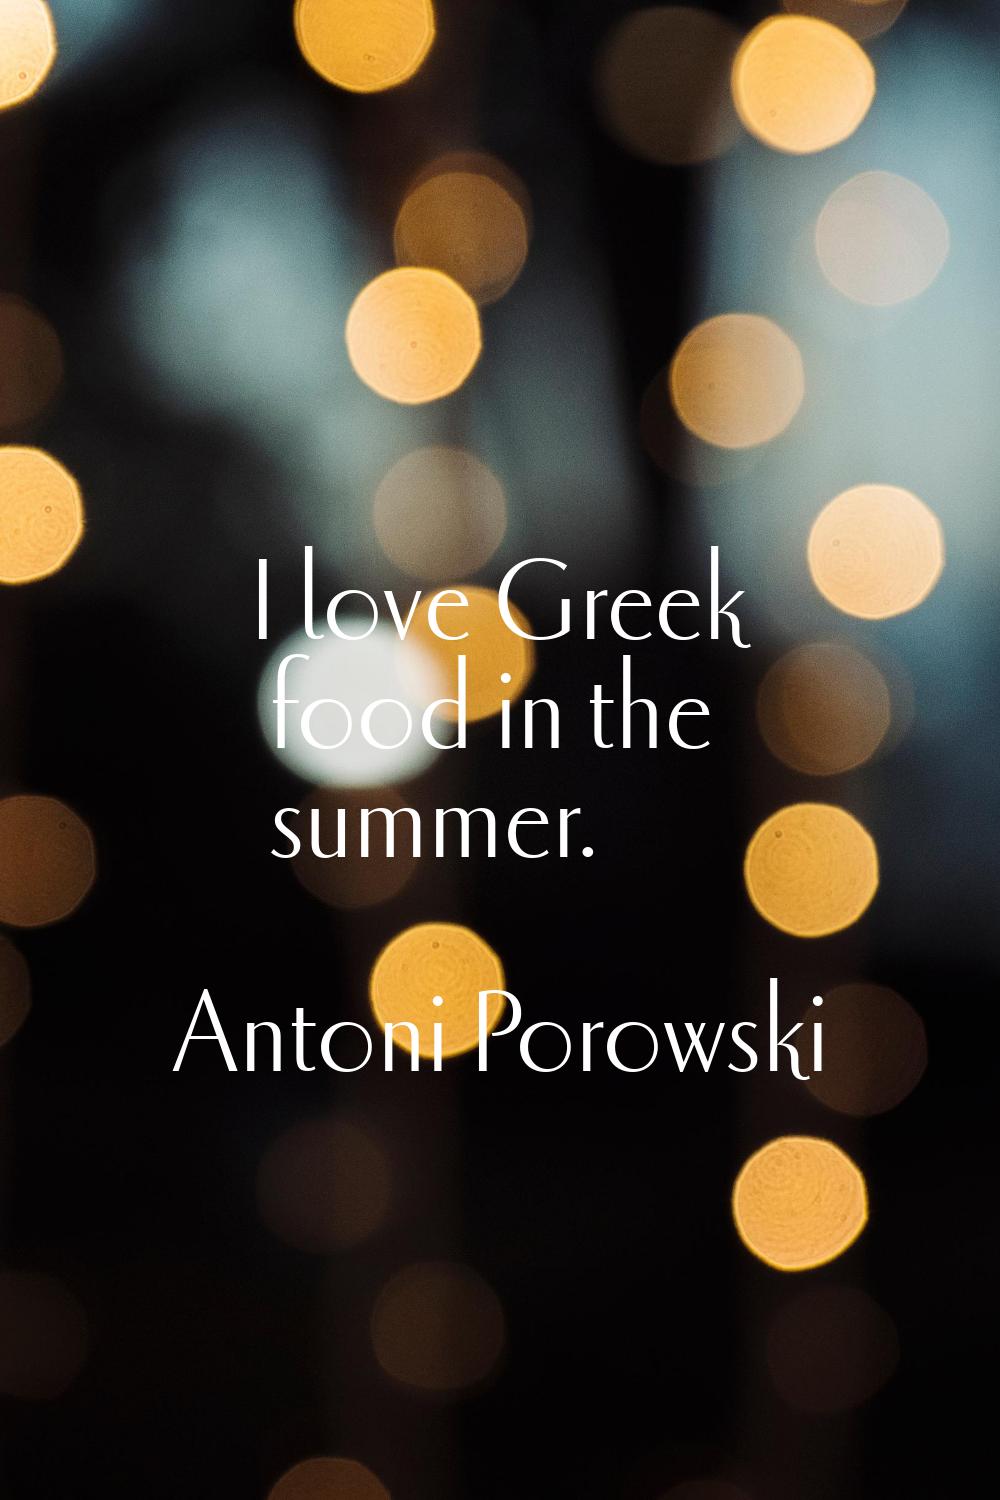 I love Greek food in the summer.